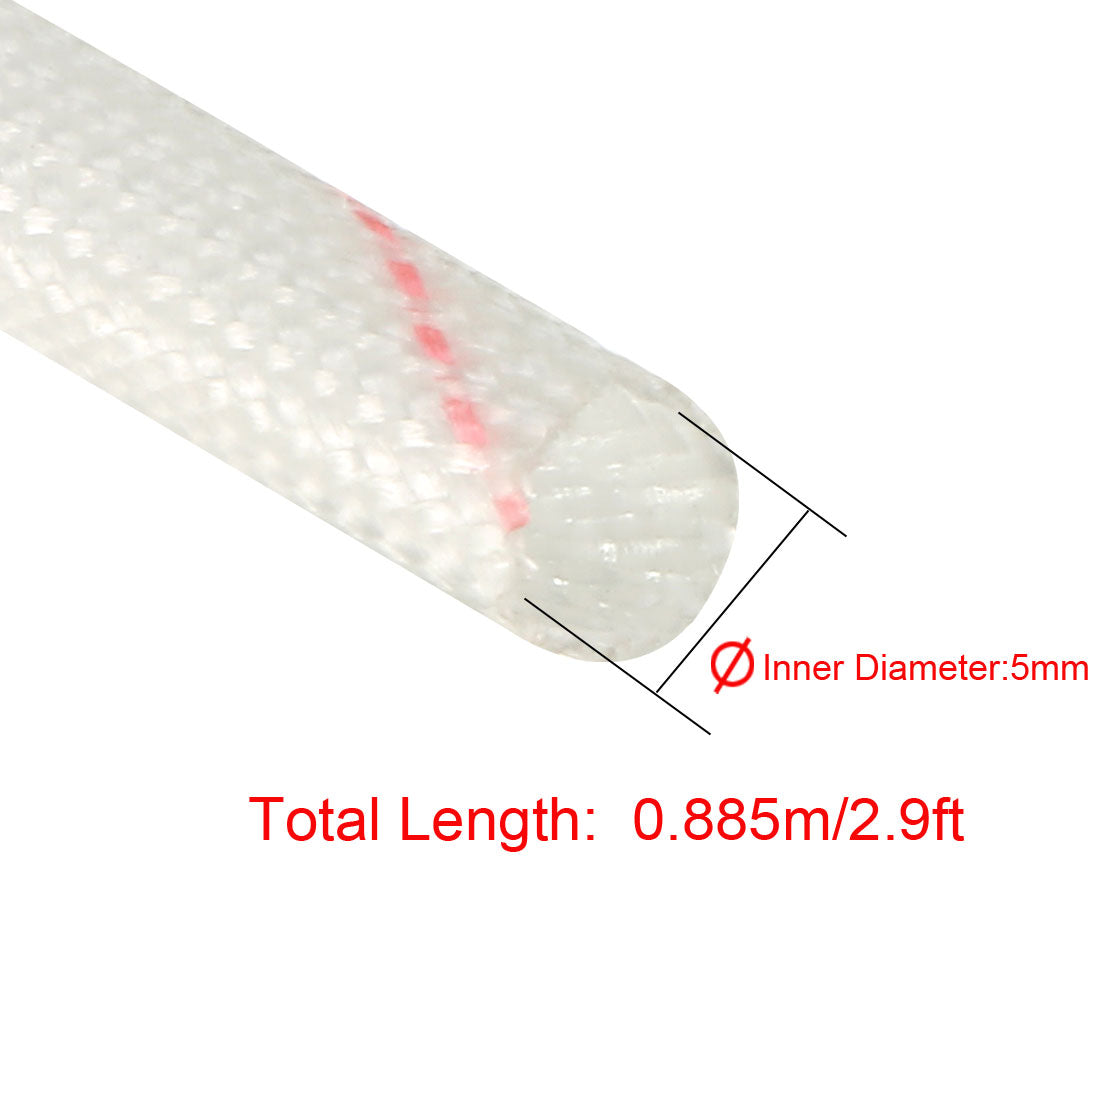 uxcell Uxcell Fiberglass Sleeve 5mm I.D. PVC Insulation Tubing 1500V Tube Adjustable Sleeving Pipe 125 Degree Centigrade Cable Wrap Wire 885mm 2.9ft Red 5Pcs